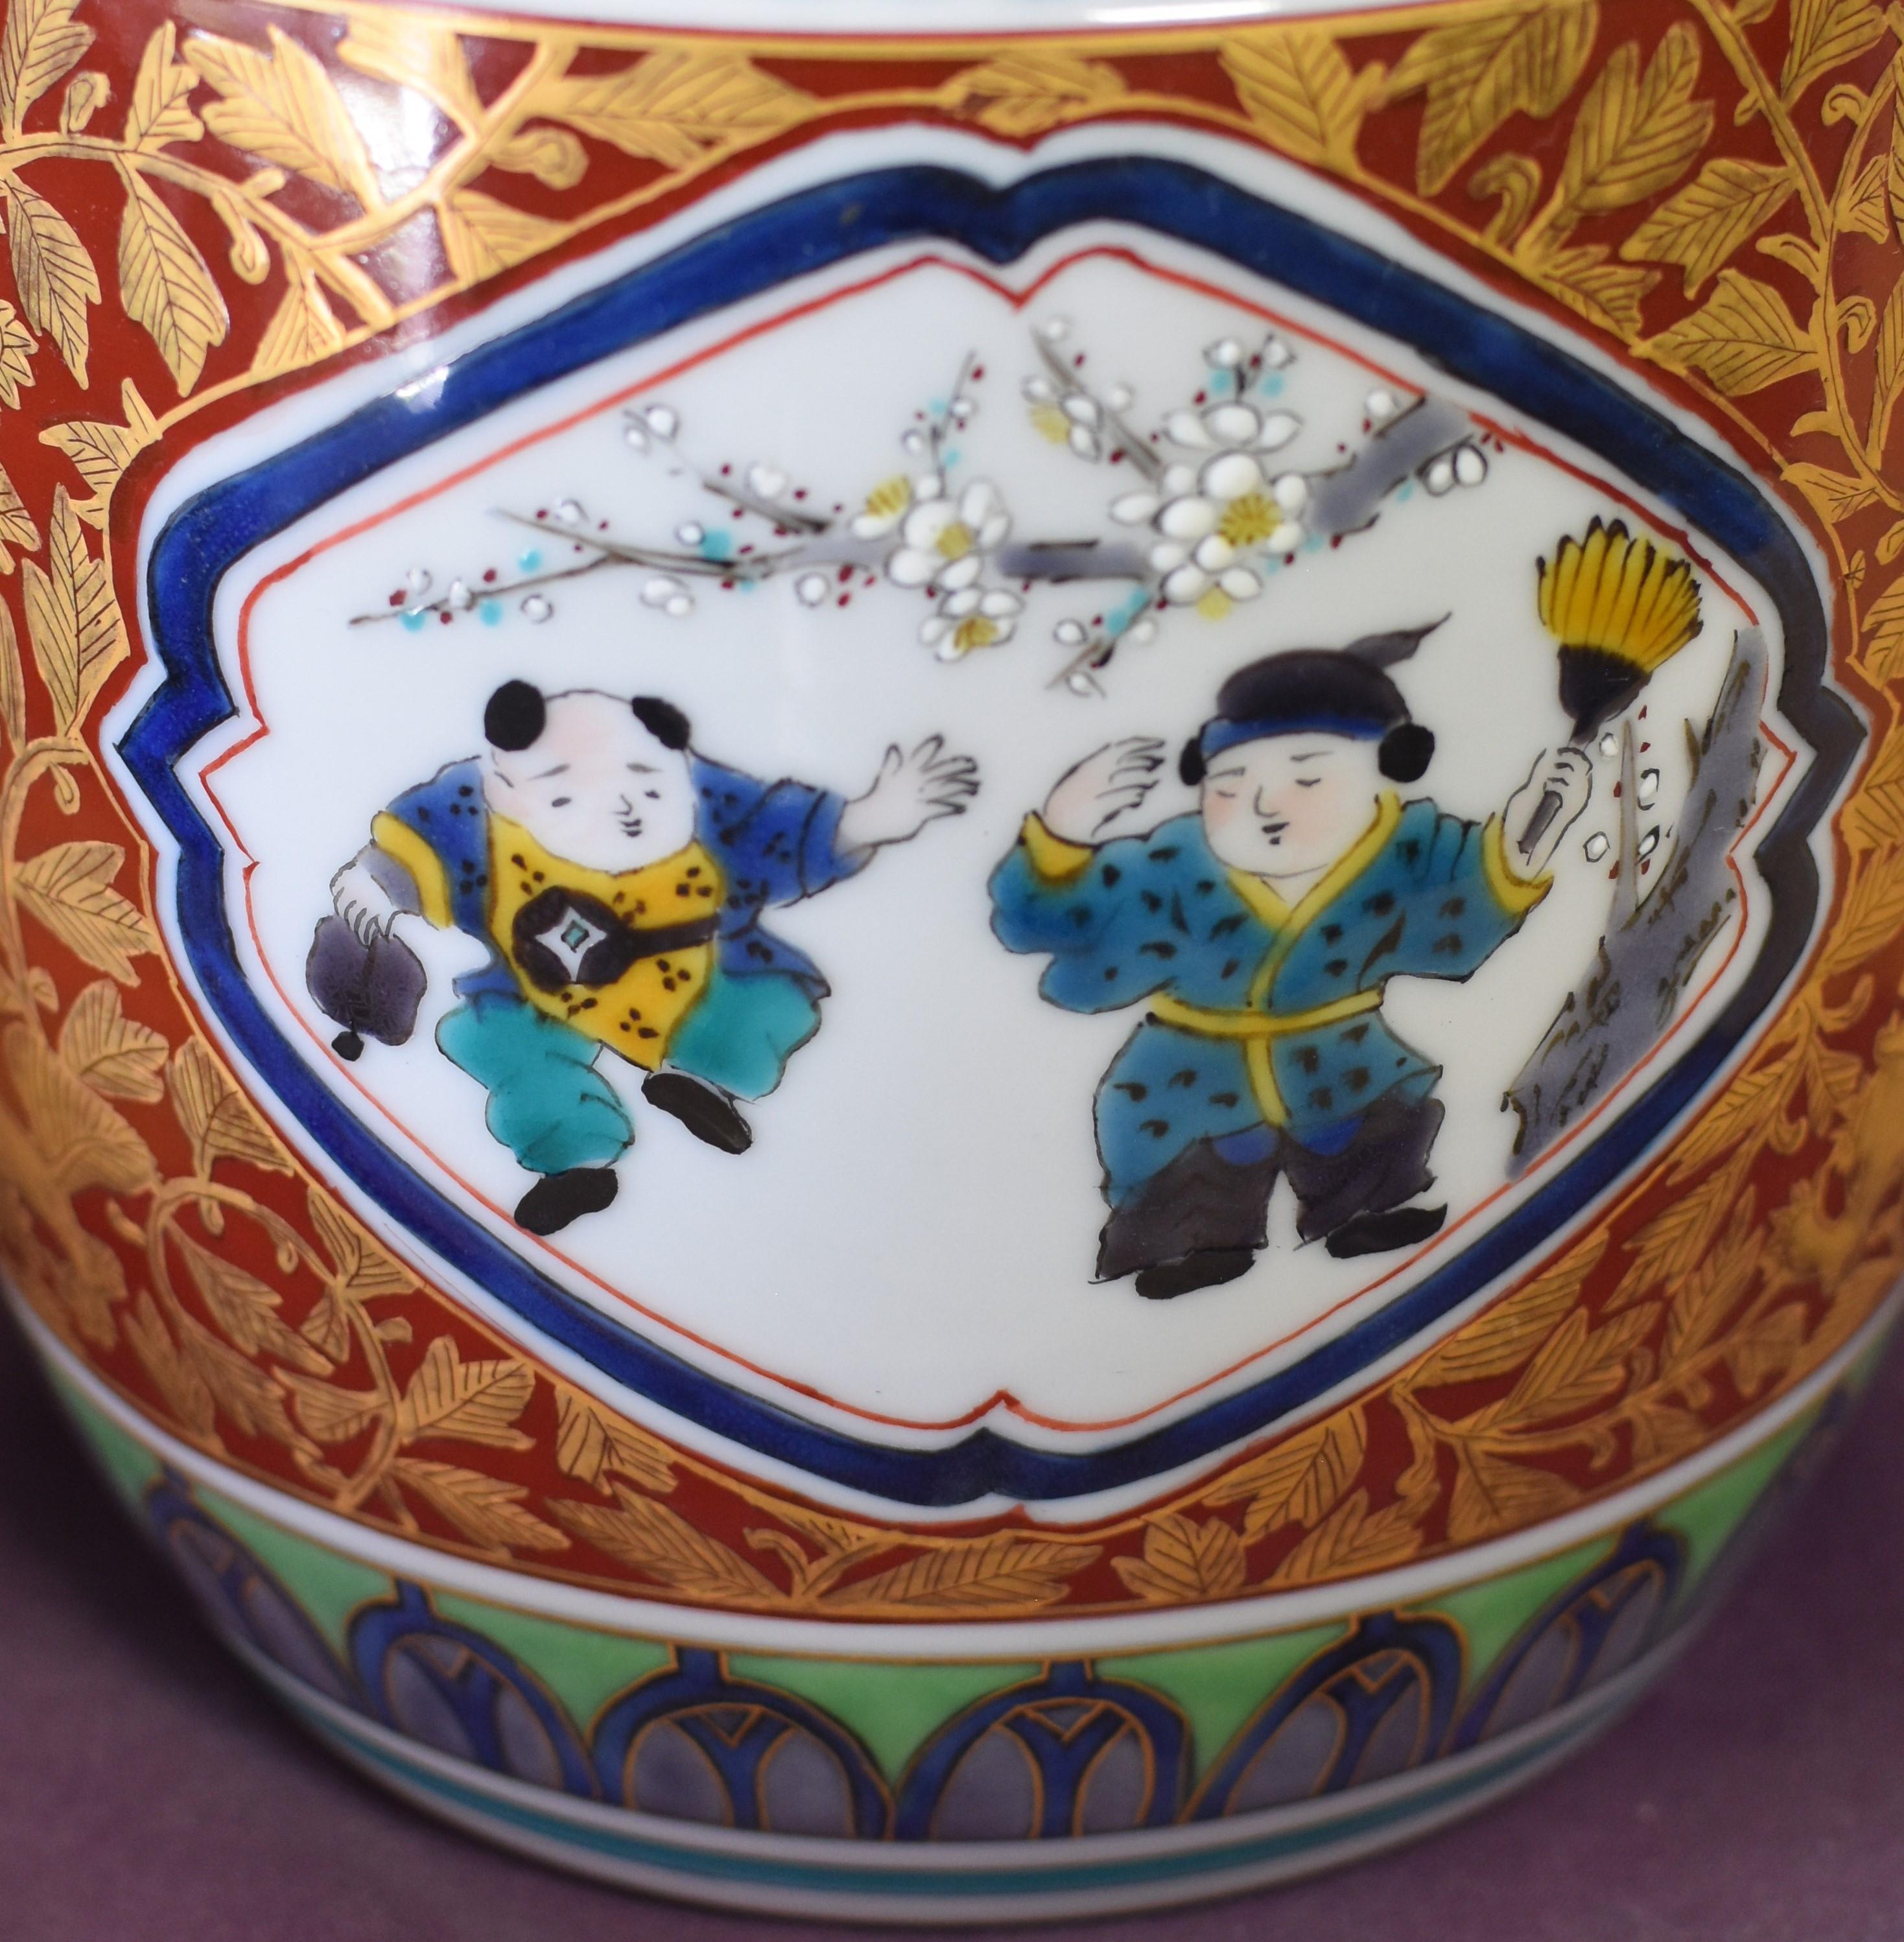 Exquisite Japanese contemporary jar/mizusashi, extremely intricately hand painted in red, green and blue and gilded with pure gold featuring seasonal panels showing children at play and classified as a tomobuta (matching lid) type. This masterpiece